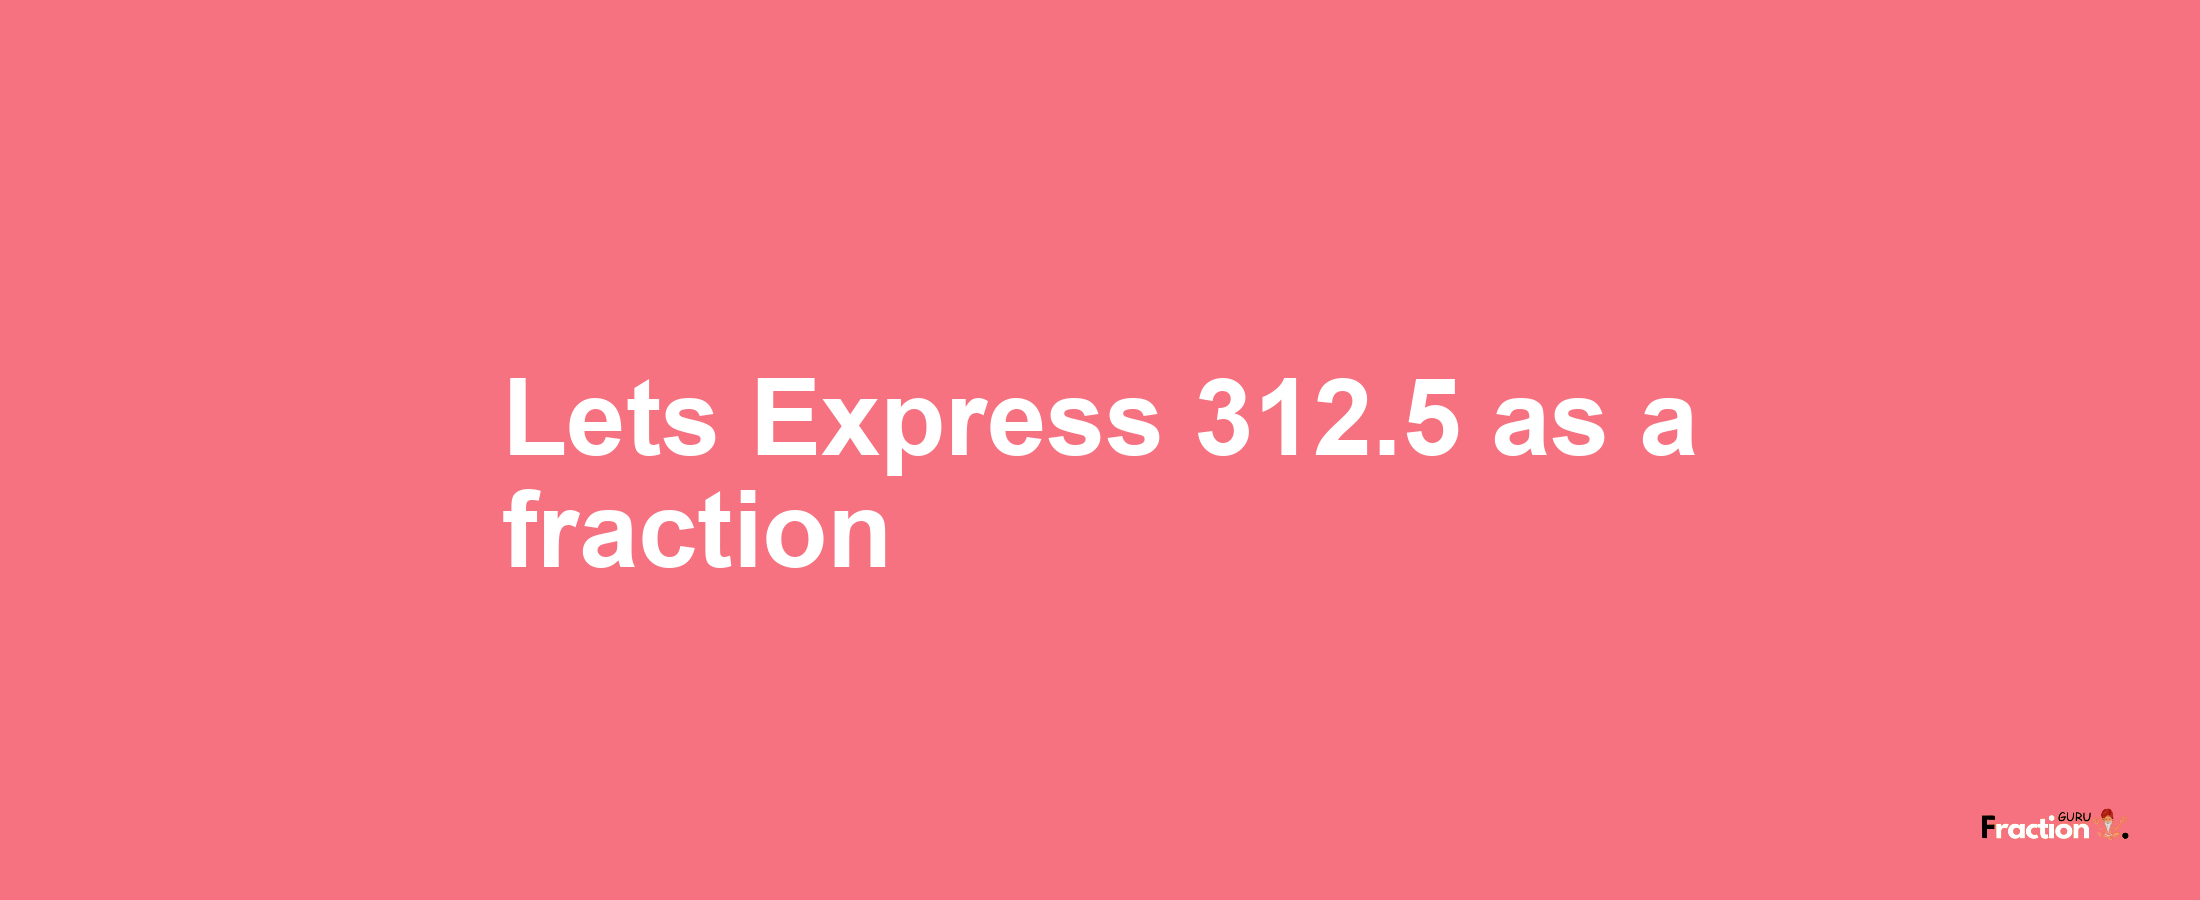 Lets Express 312.5 as afraction